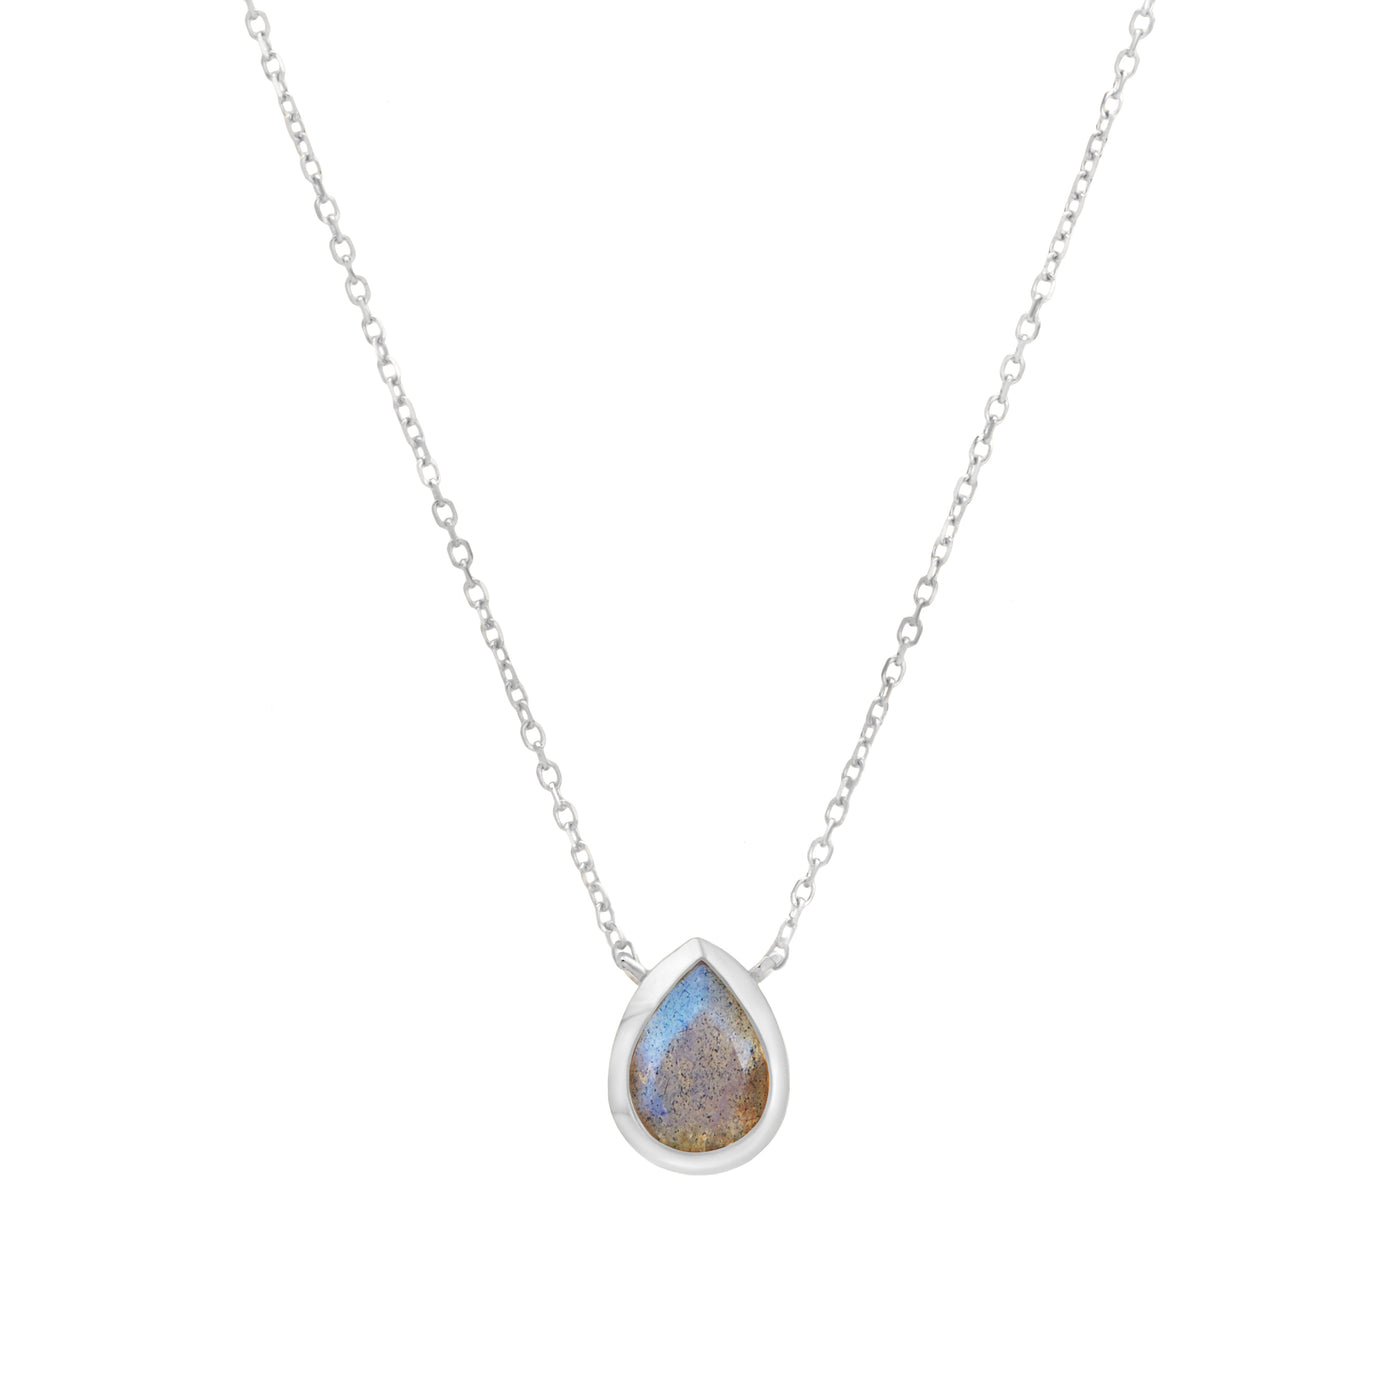 14 Karat White Gold Necklace with Pear Shaped Labradorite Stone Against White Background